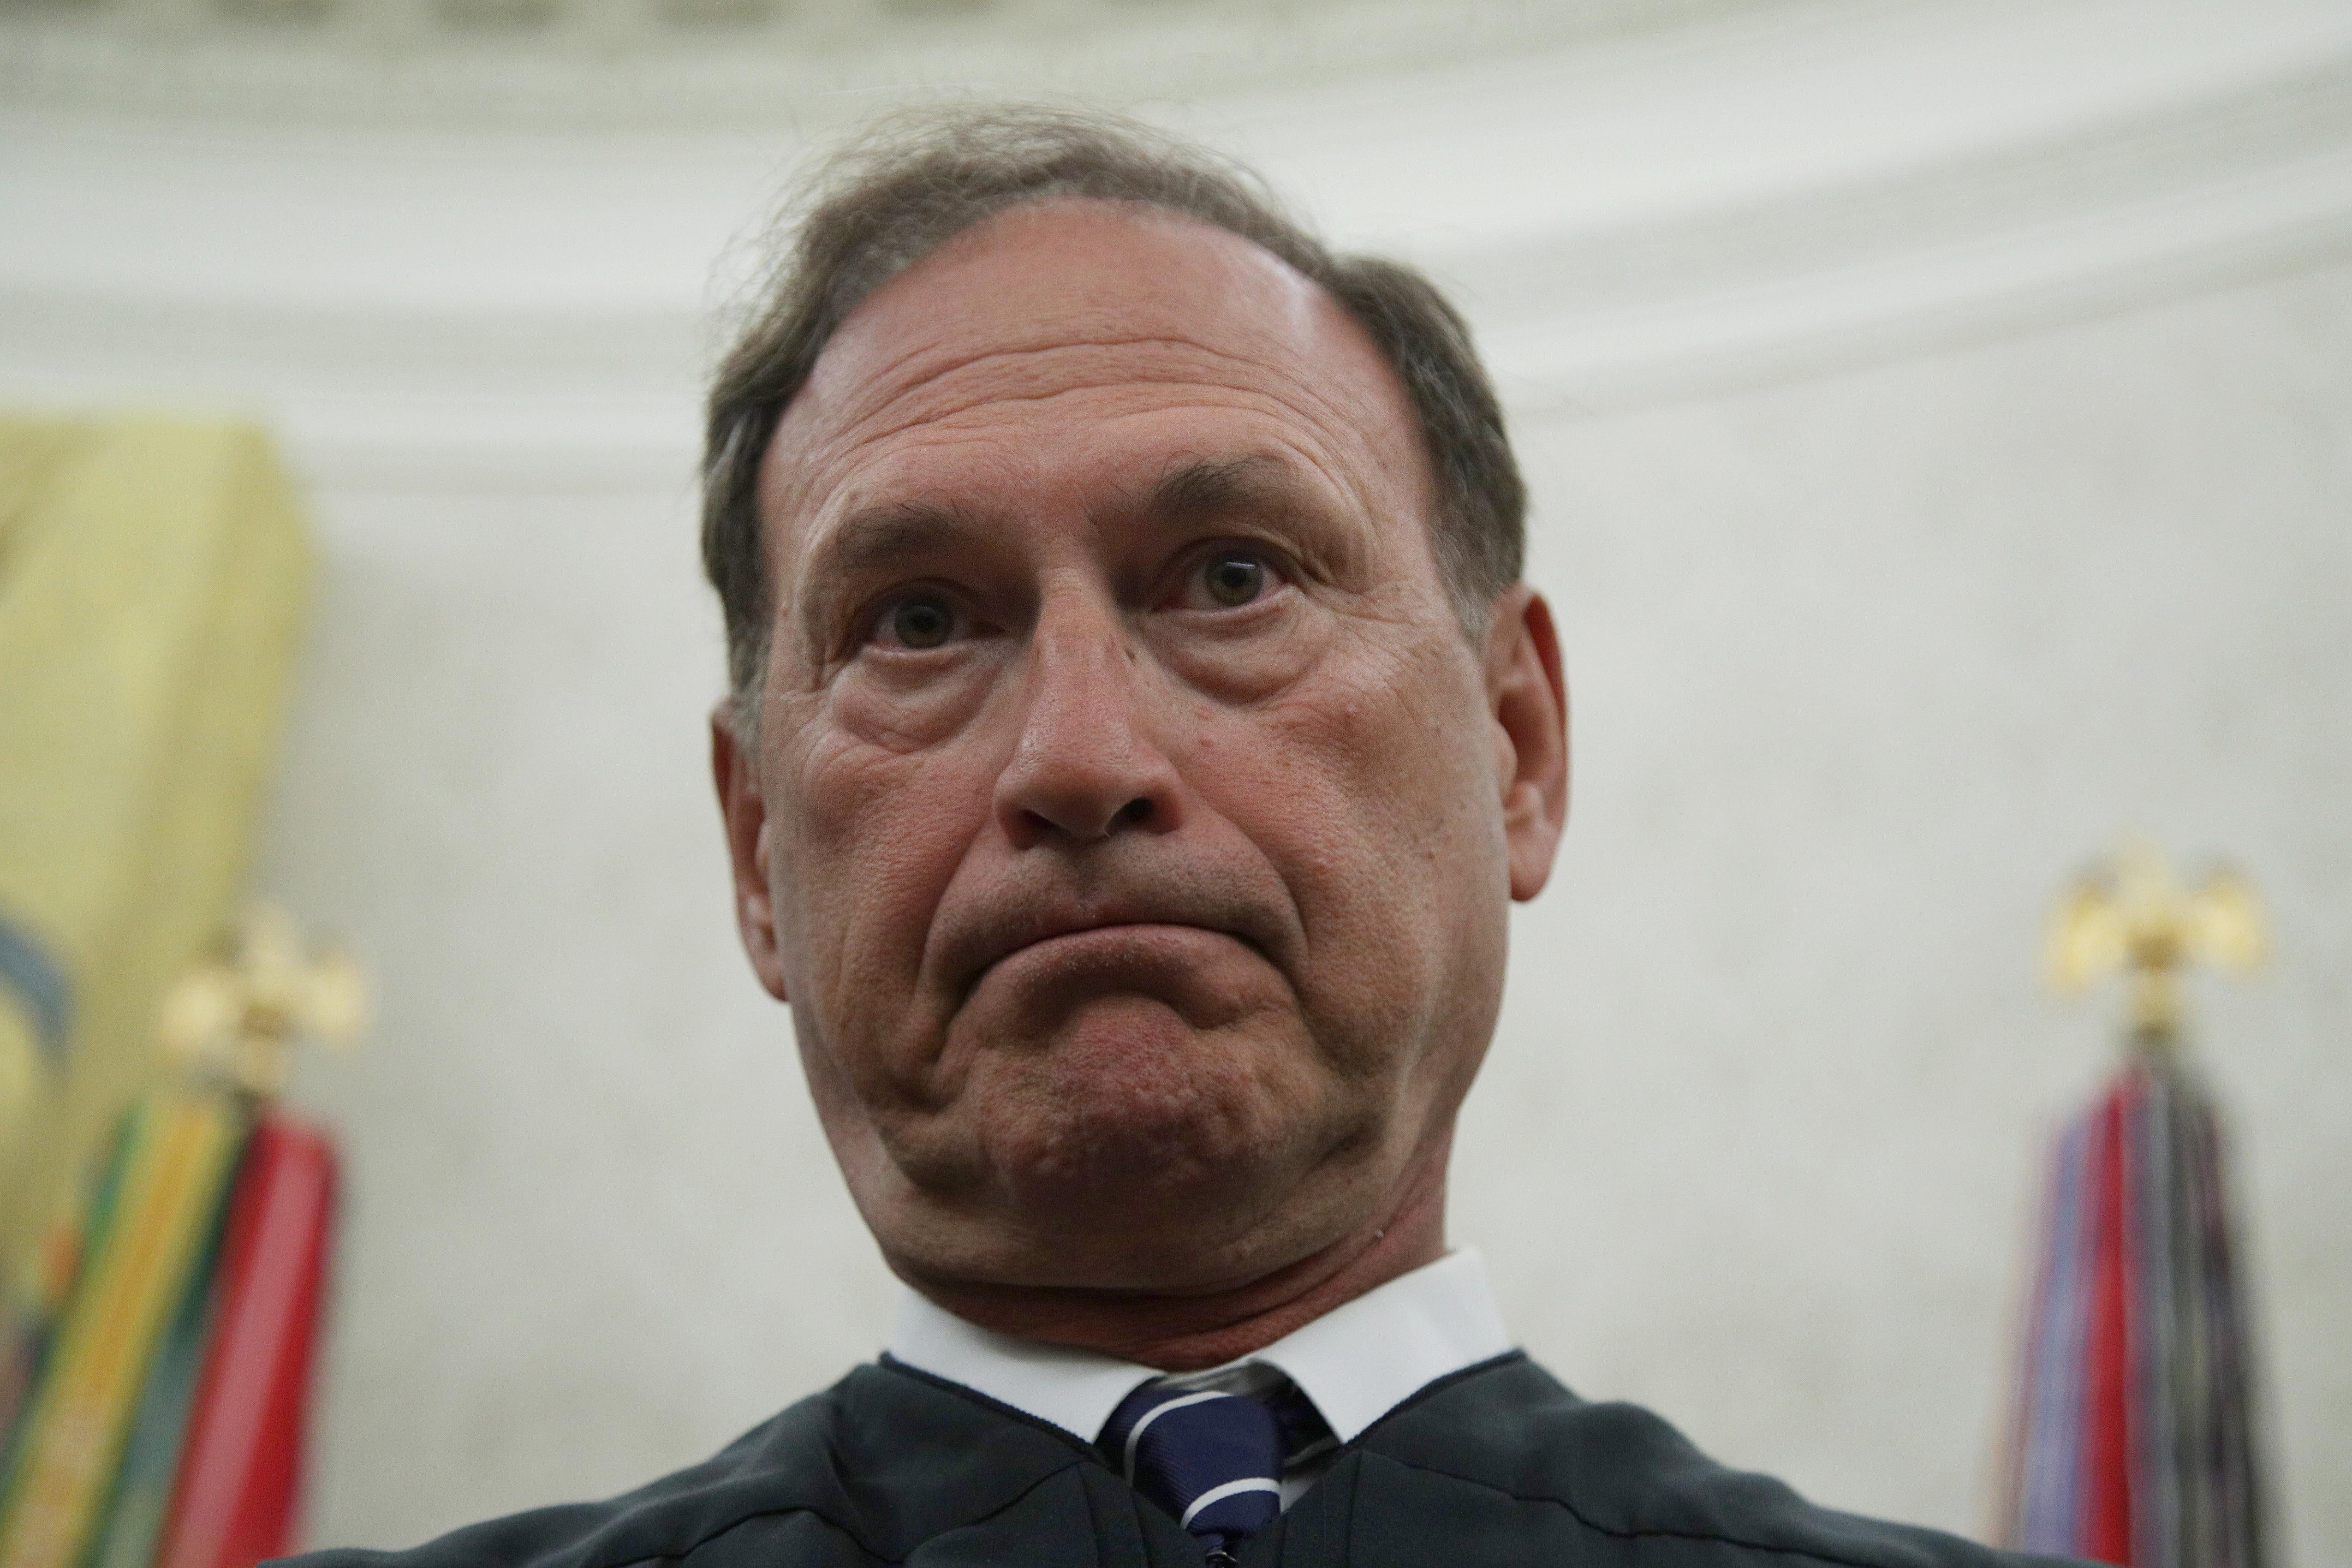 Alito standing in his robes